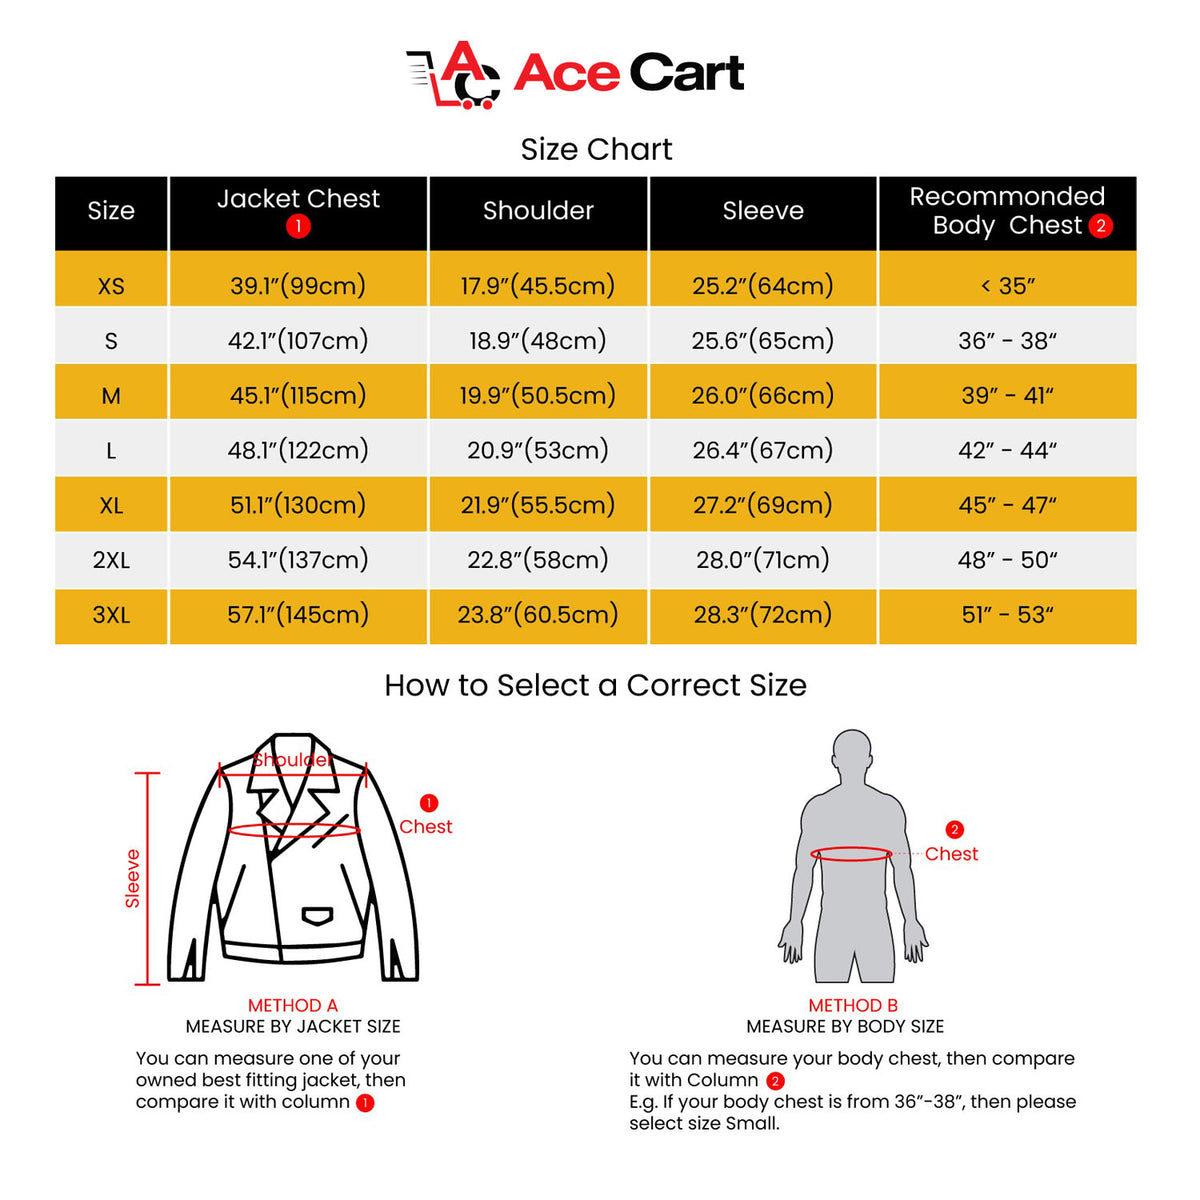 Mocha suede bomber jacket in the foreground against an Ace Cart size chart background, highlighting the product's stylish suede material and providing sizing details for a comfortable fit.